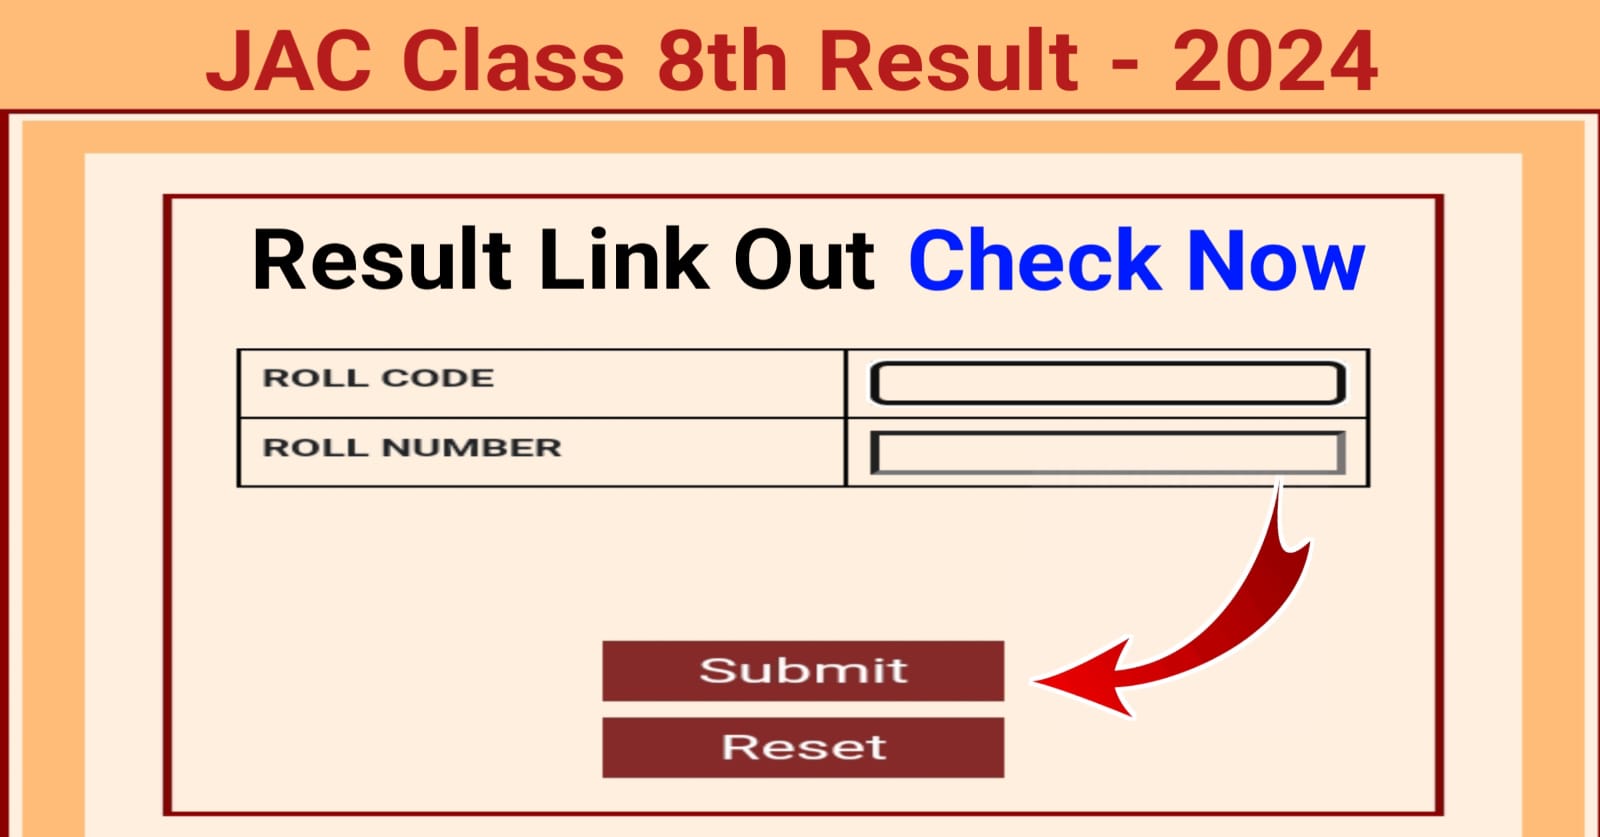 JAC Class 8th Result 2024 - Link Out (Check Now)